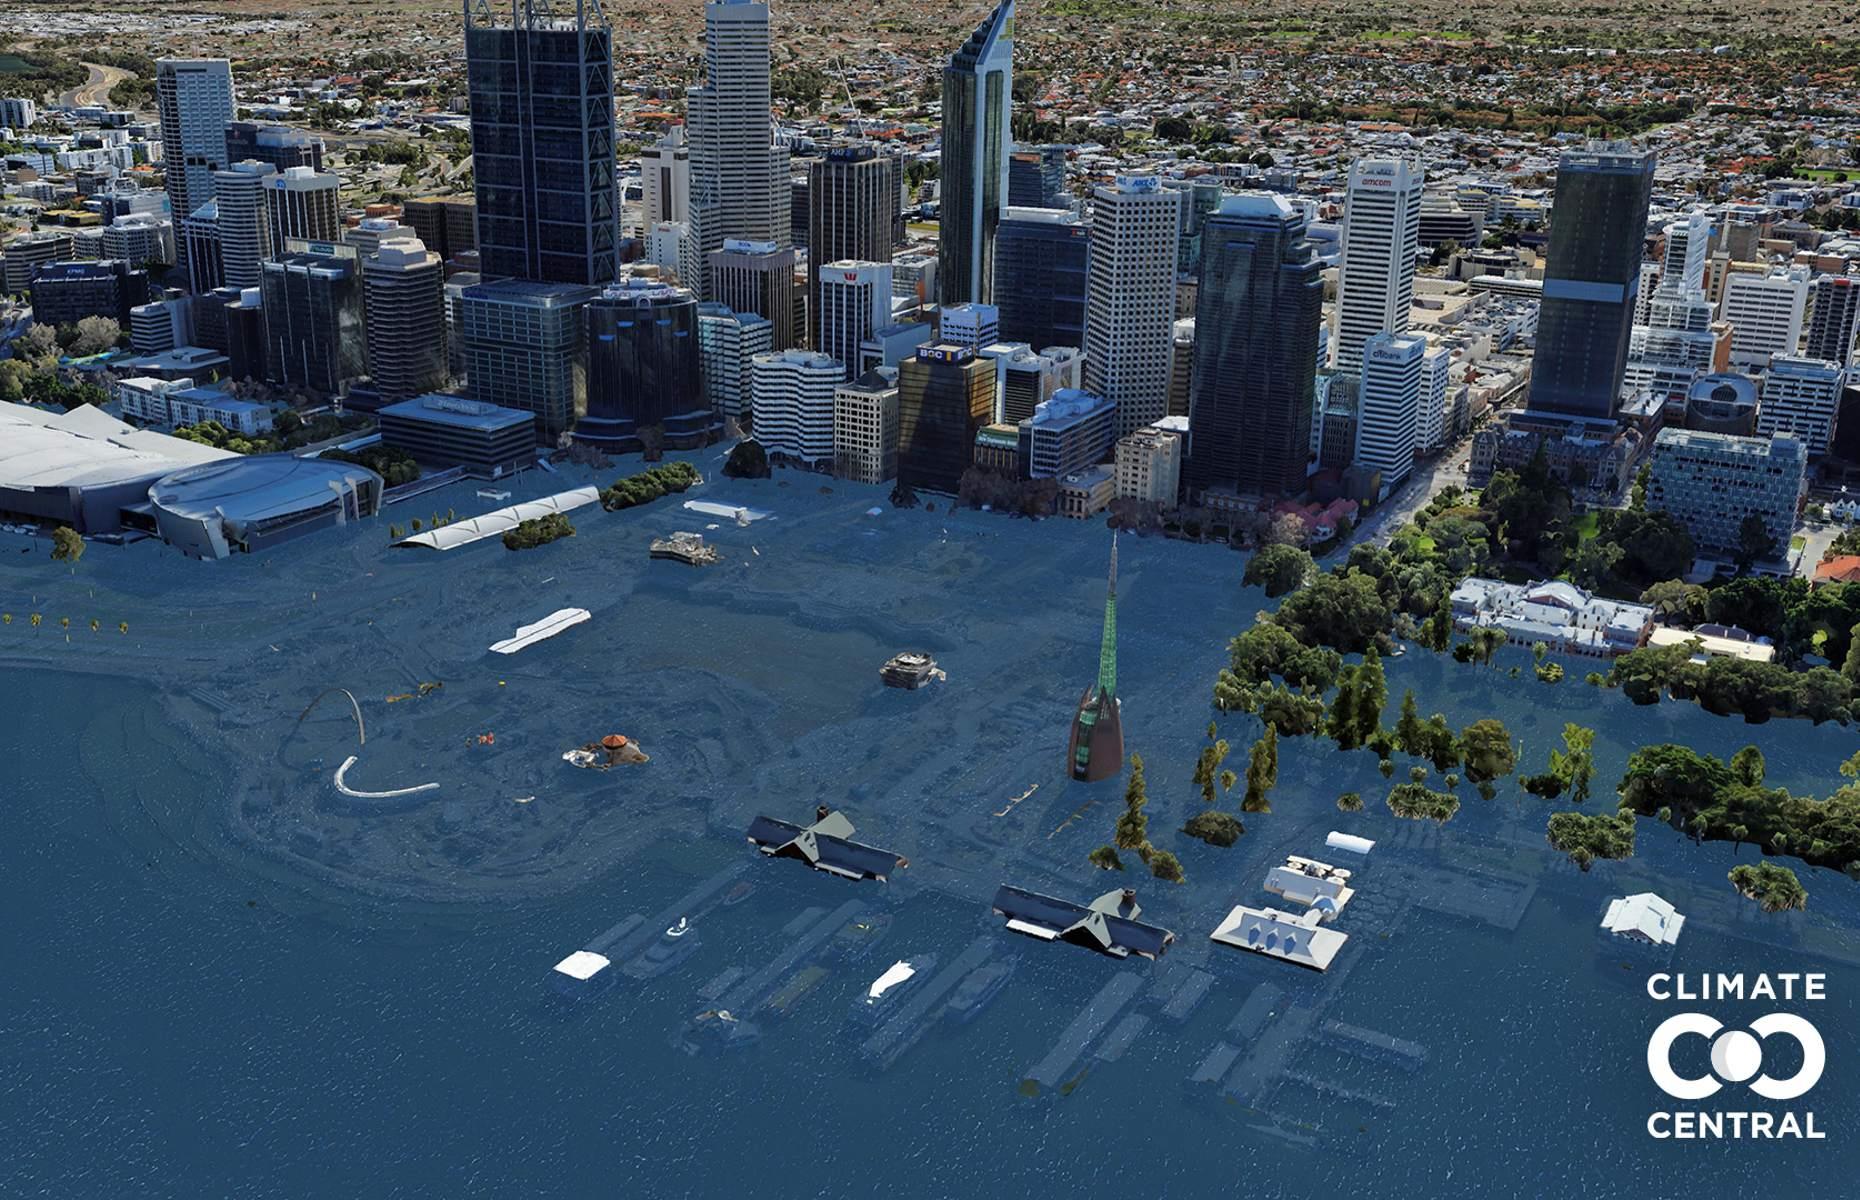 If we continue on our current carbon path, there won’t be much left of Elizabeth Quay in Perth, Australia. In fact pretty much the entire harbour is set to be underwater – you can just make out the rooftops poking out in the foreground of this image.